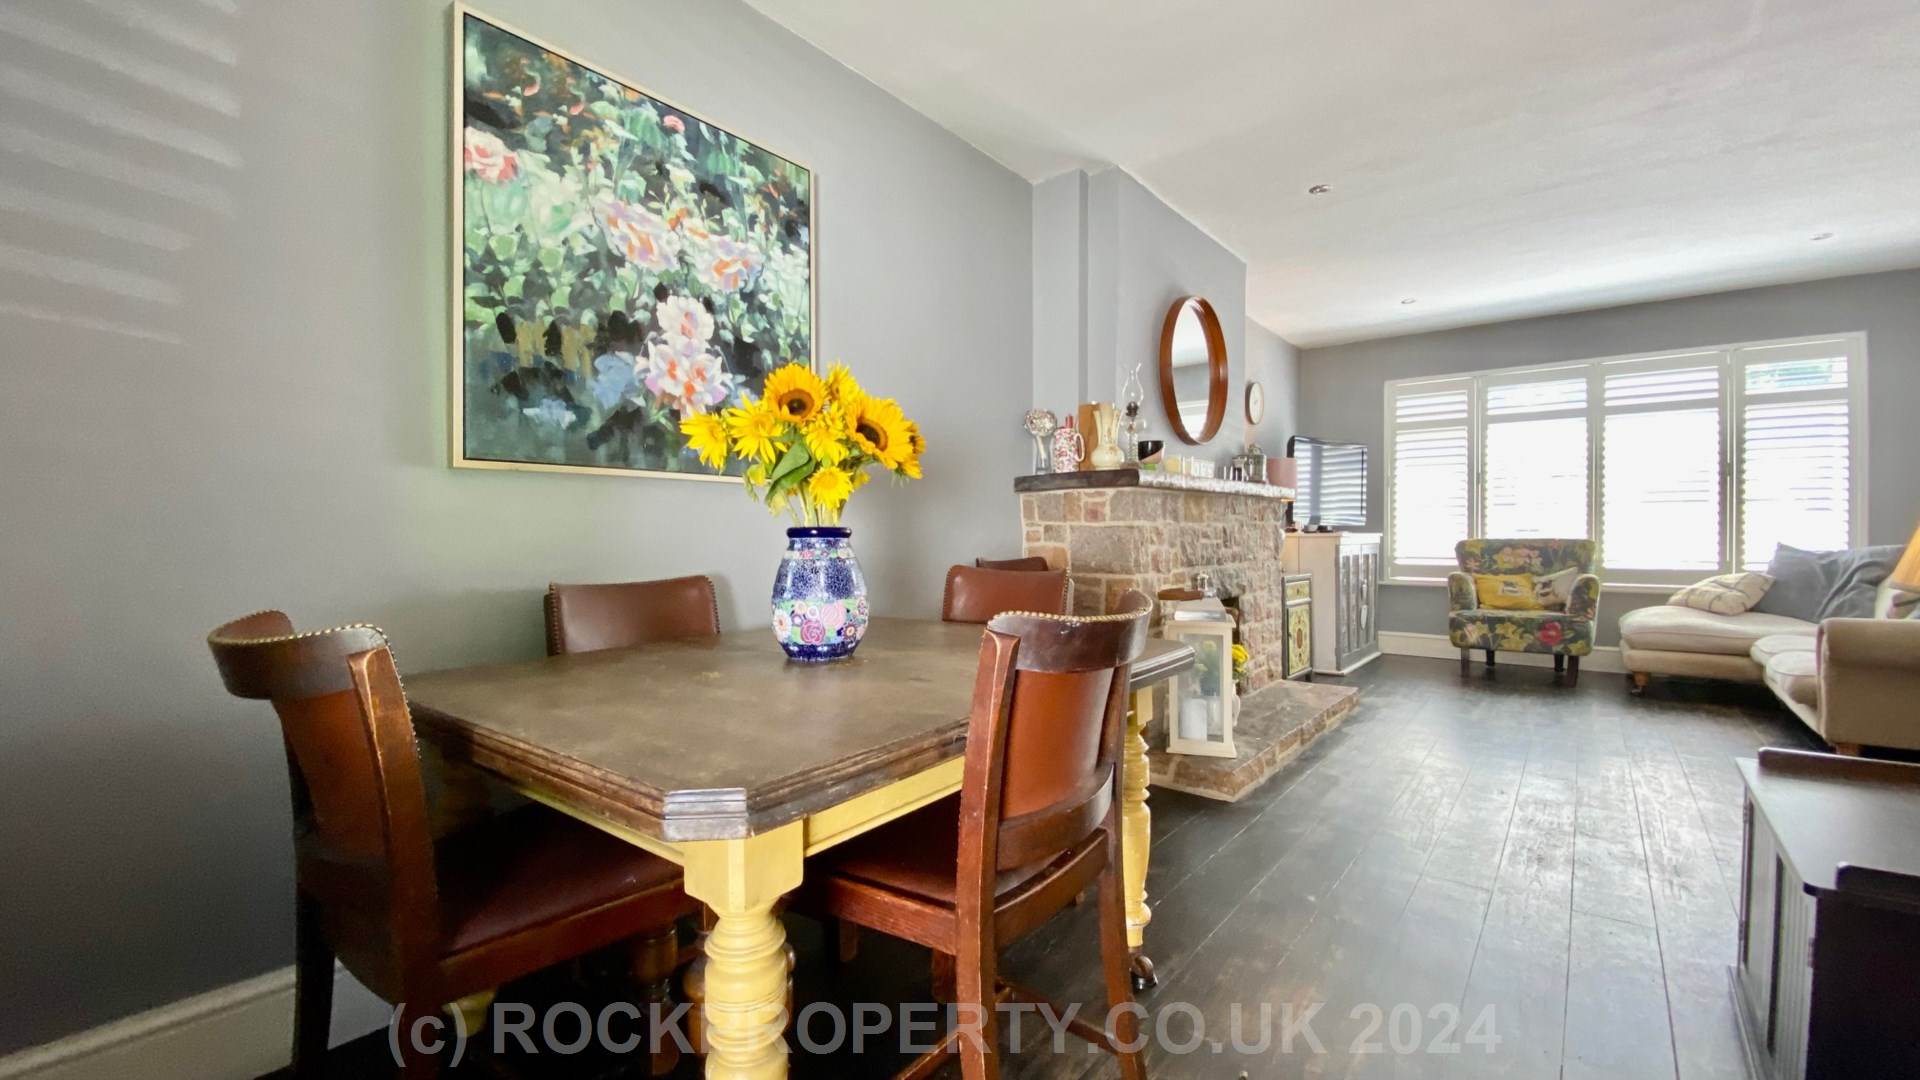 MODERN 3 BED FAMILY HOME, Langley Park, St Saviour, Image 10